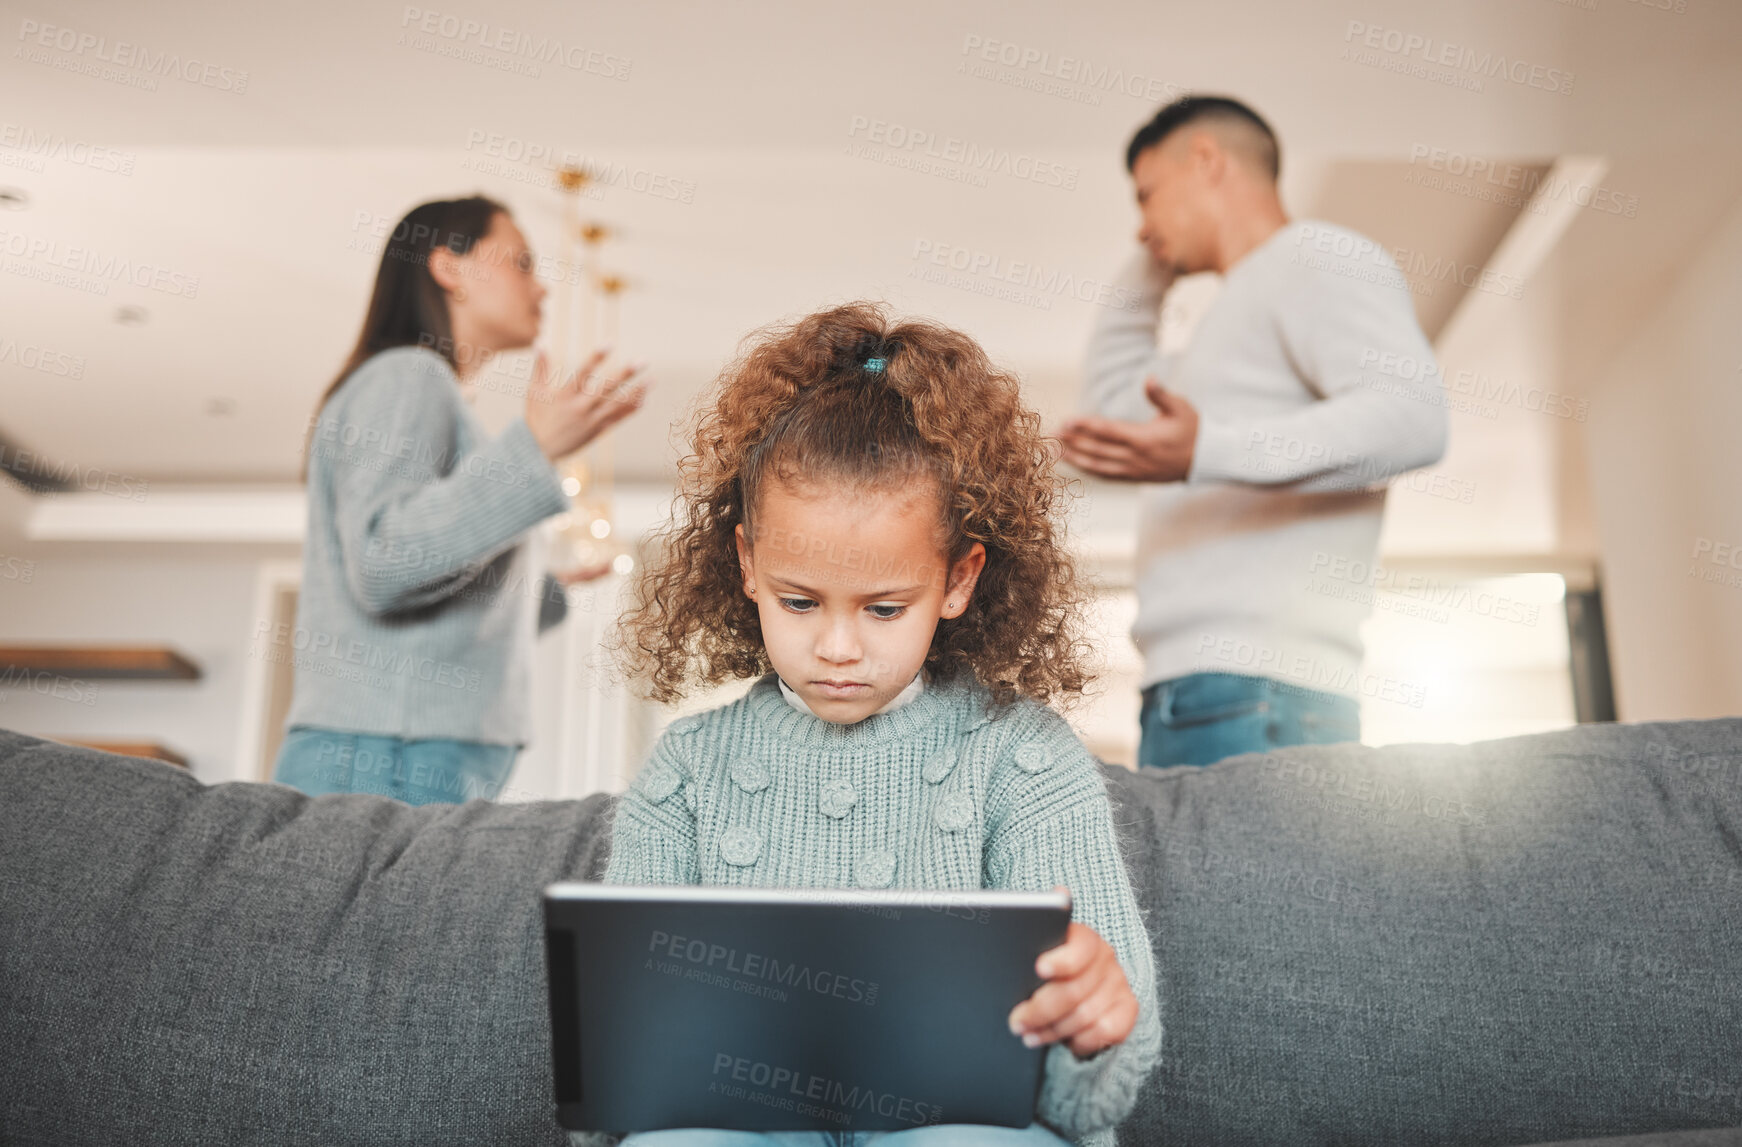 Buy stock photo Shot of a little girl using a digital tablet to listen to music while her parents argue